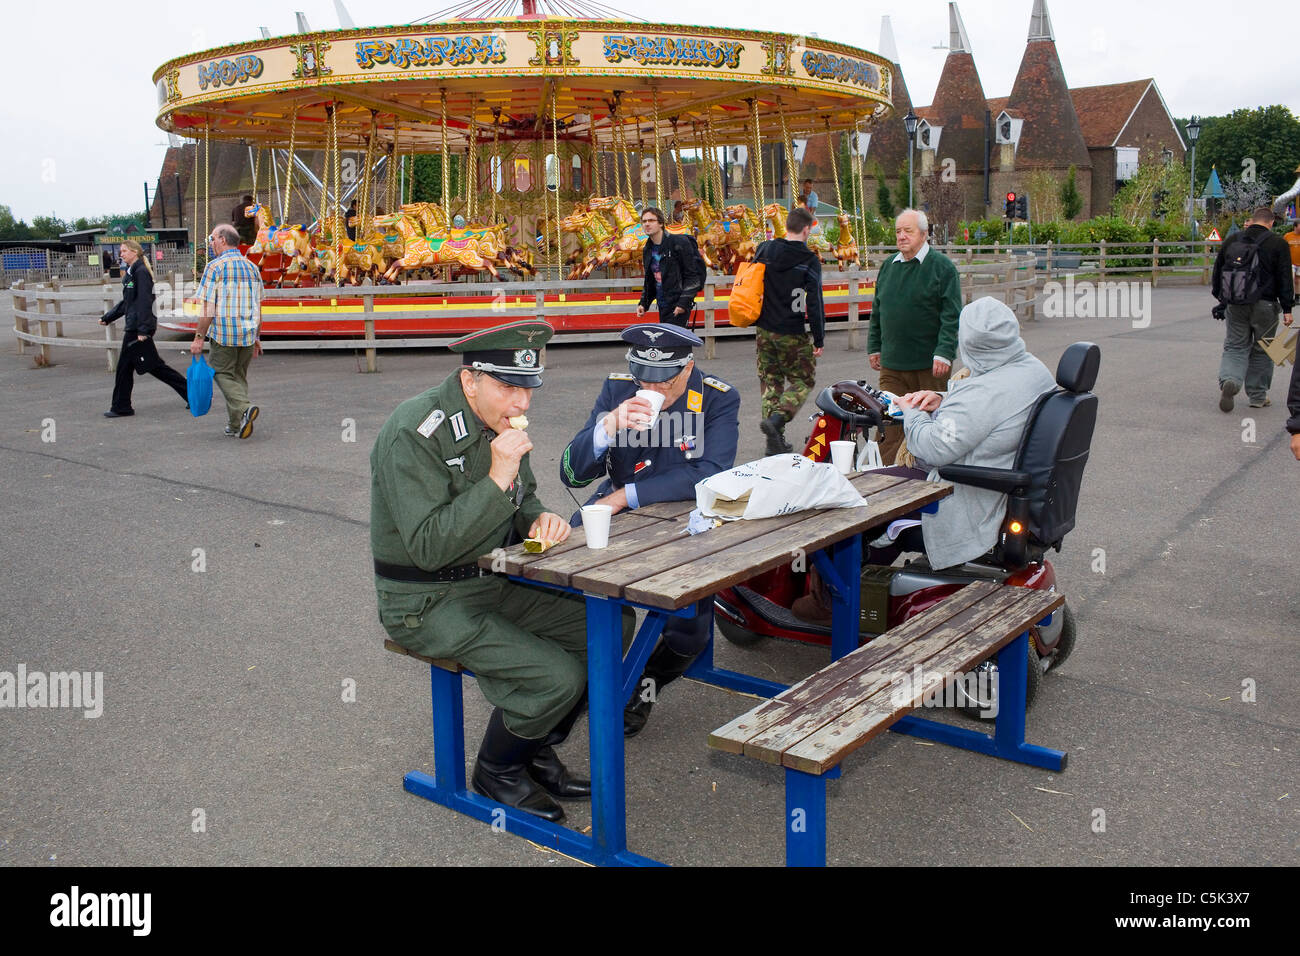 Two men wearing the uniform of German soldiers eat an ice cream by a carousel. Stock Photo